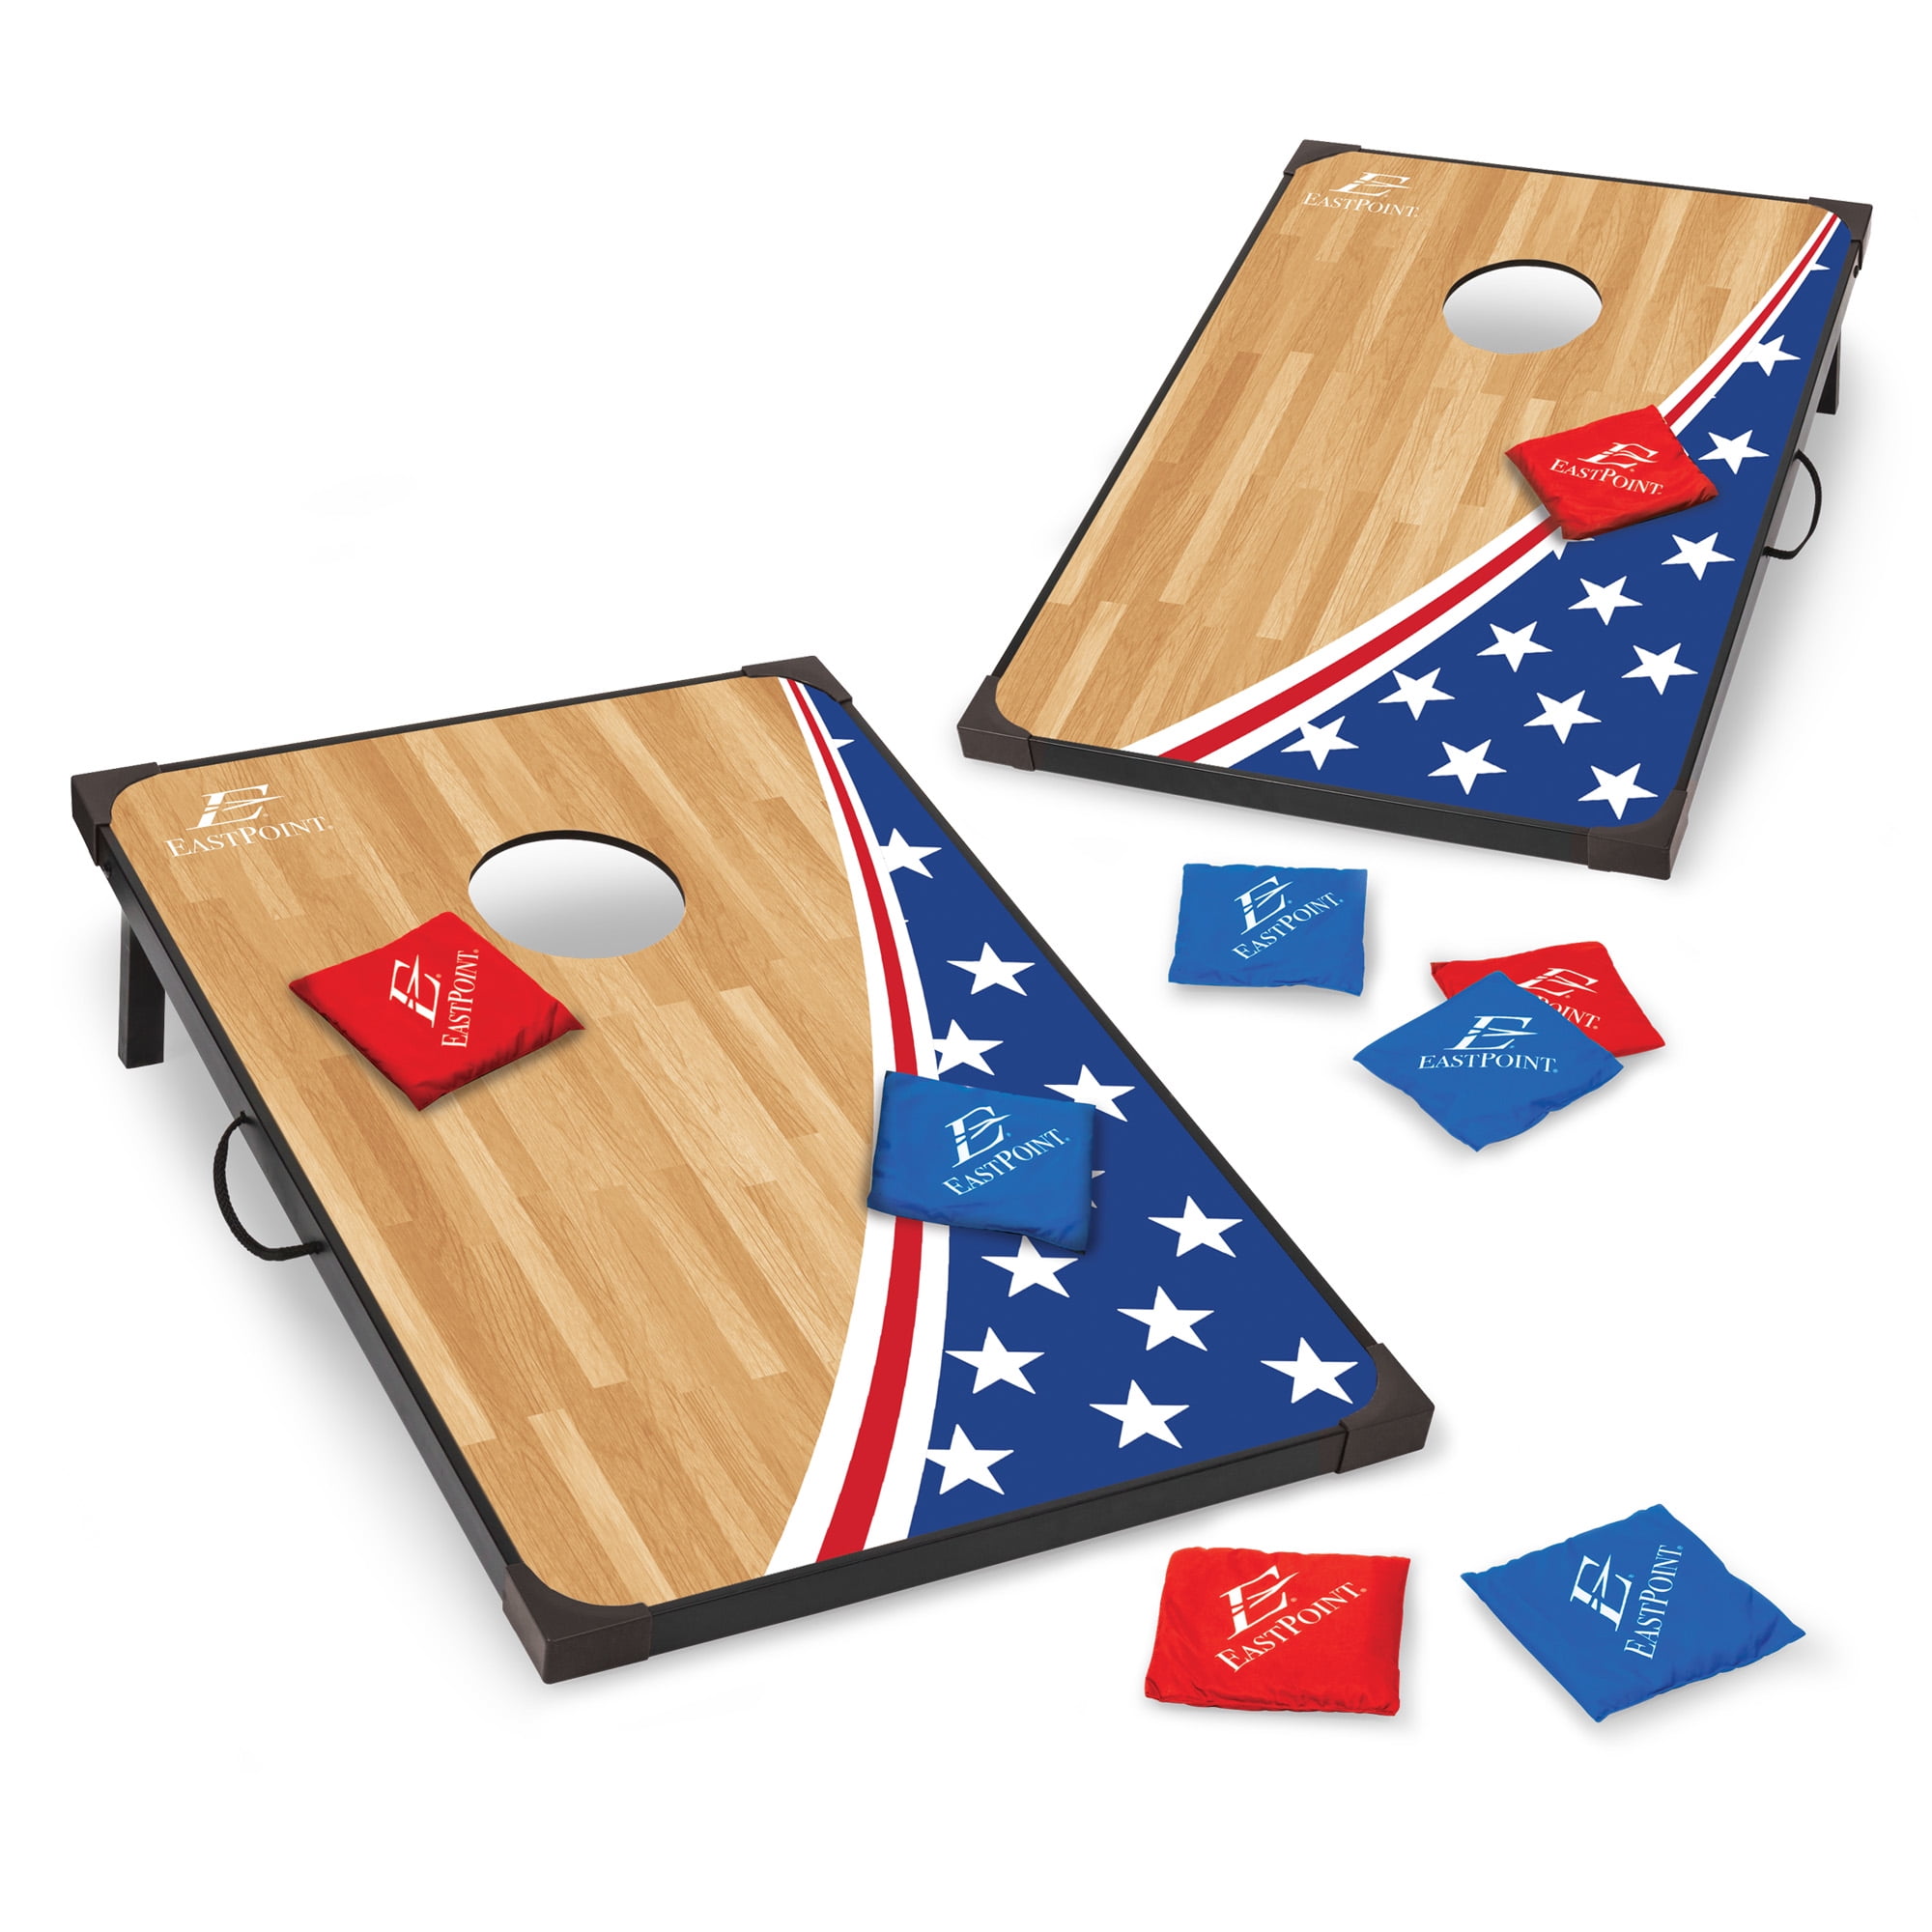 Details about   Wooden Cornhole Bean Bag Toss Game Set Unfinished 3 x 2' Foldable Carry Case 